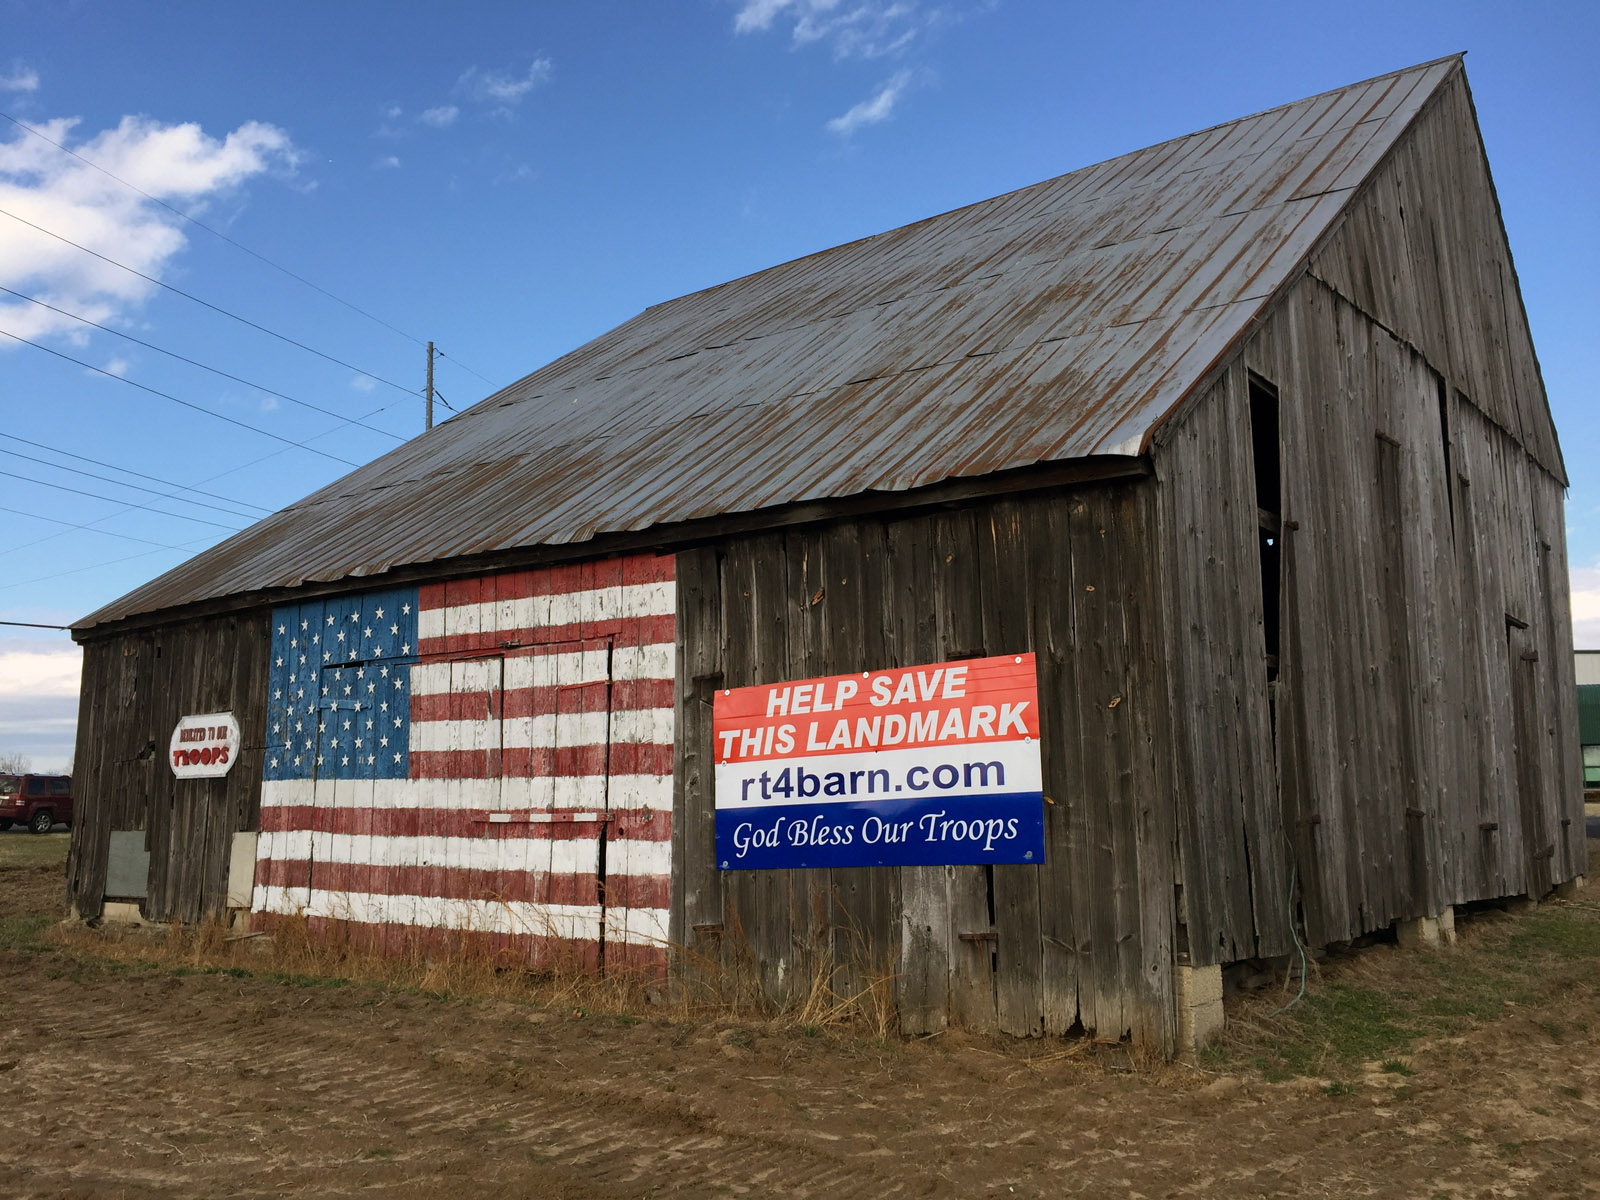 A fundraising drive is underway to raise $64,000 to move this barn to donated land across Route 4. The land it sits on now is slated for development. (WTOP/Michelle Basch)